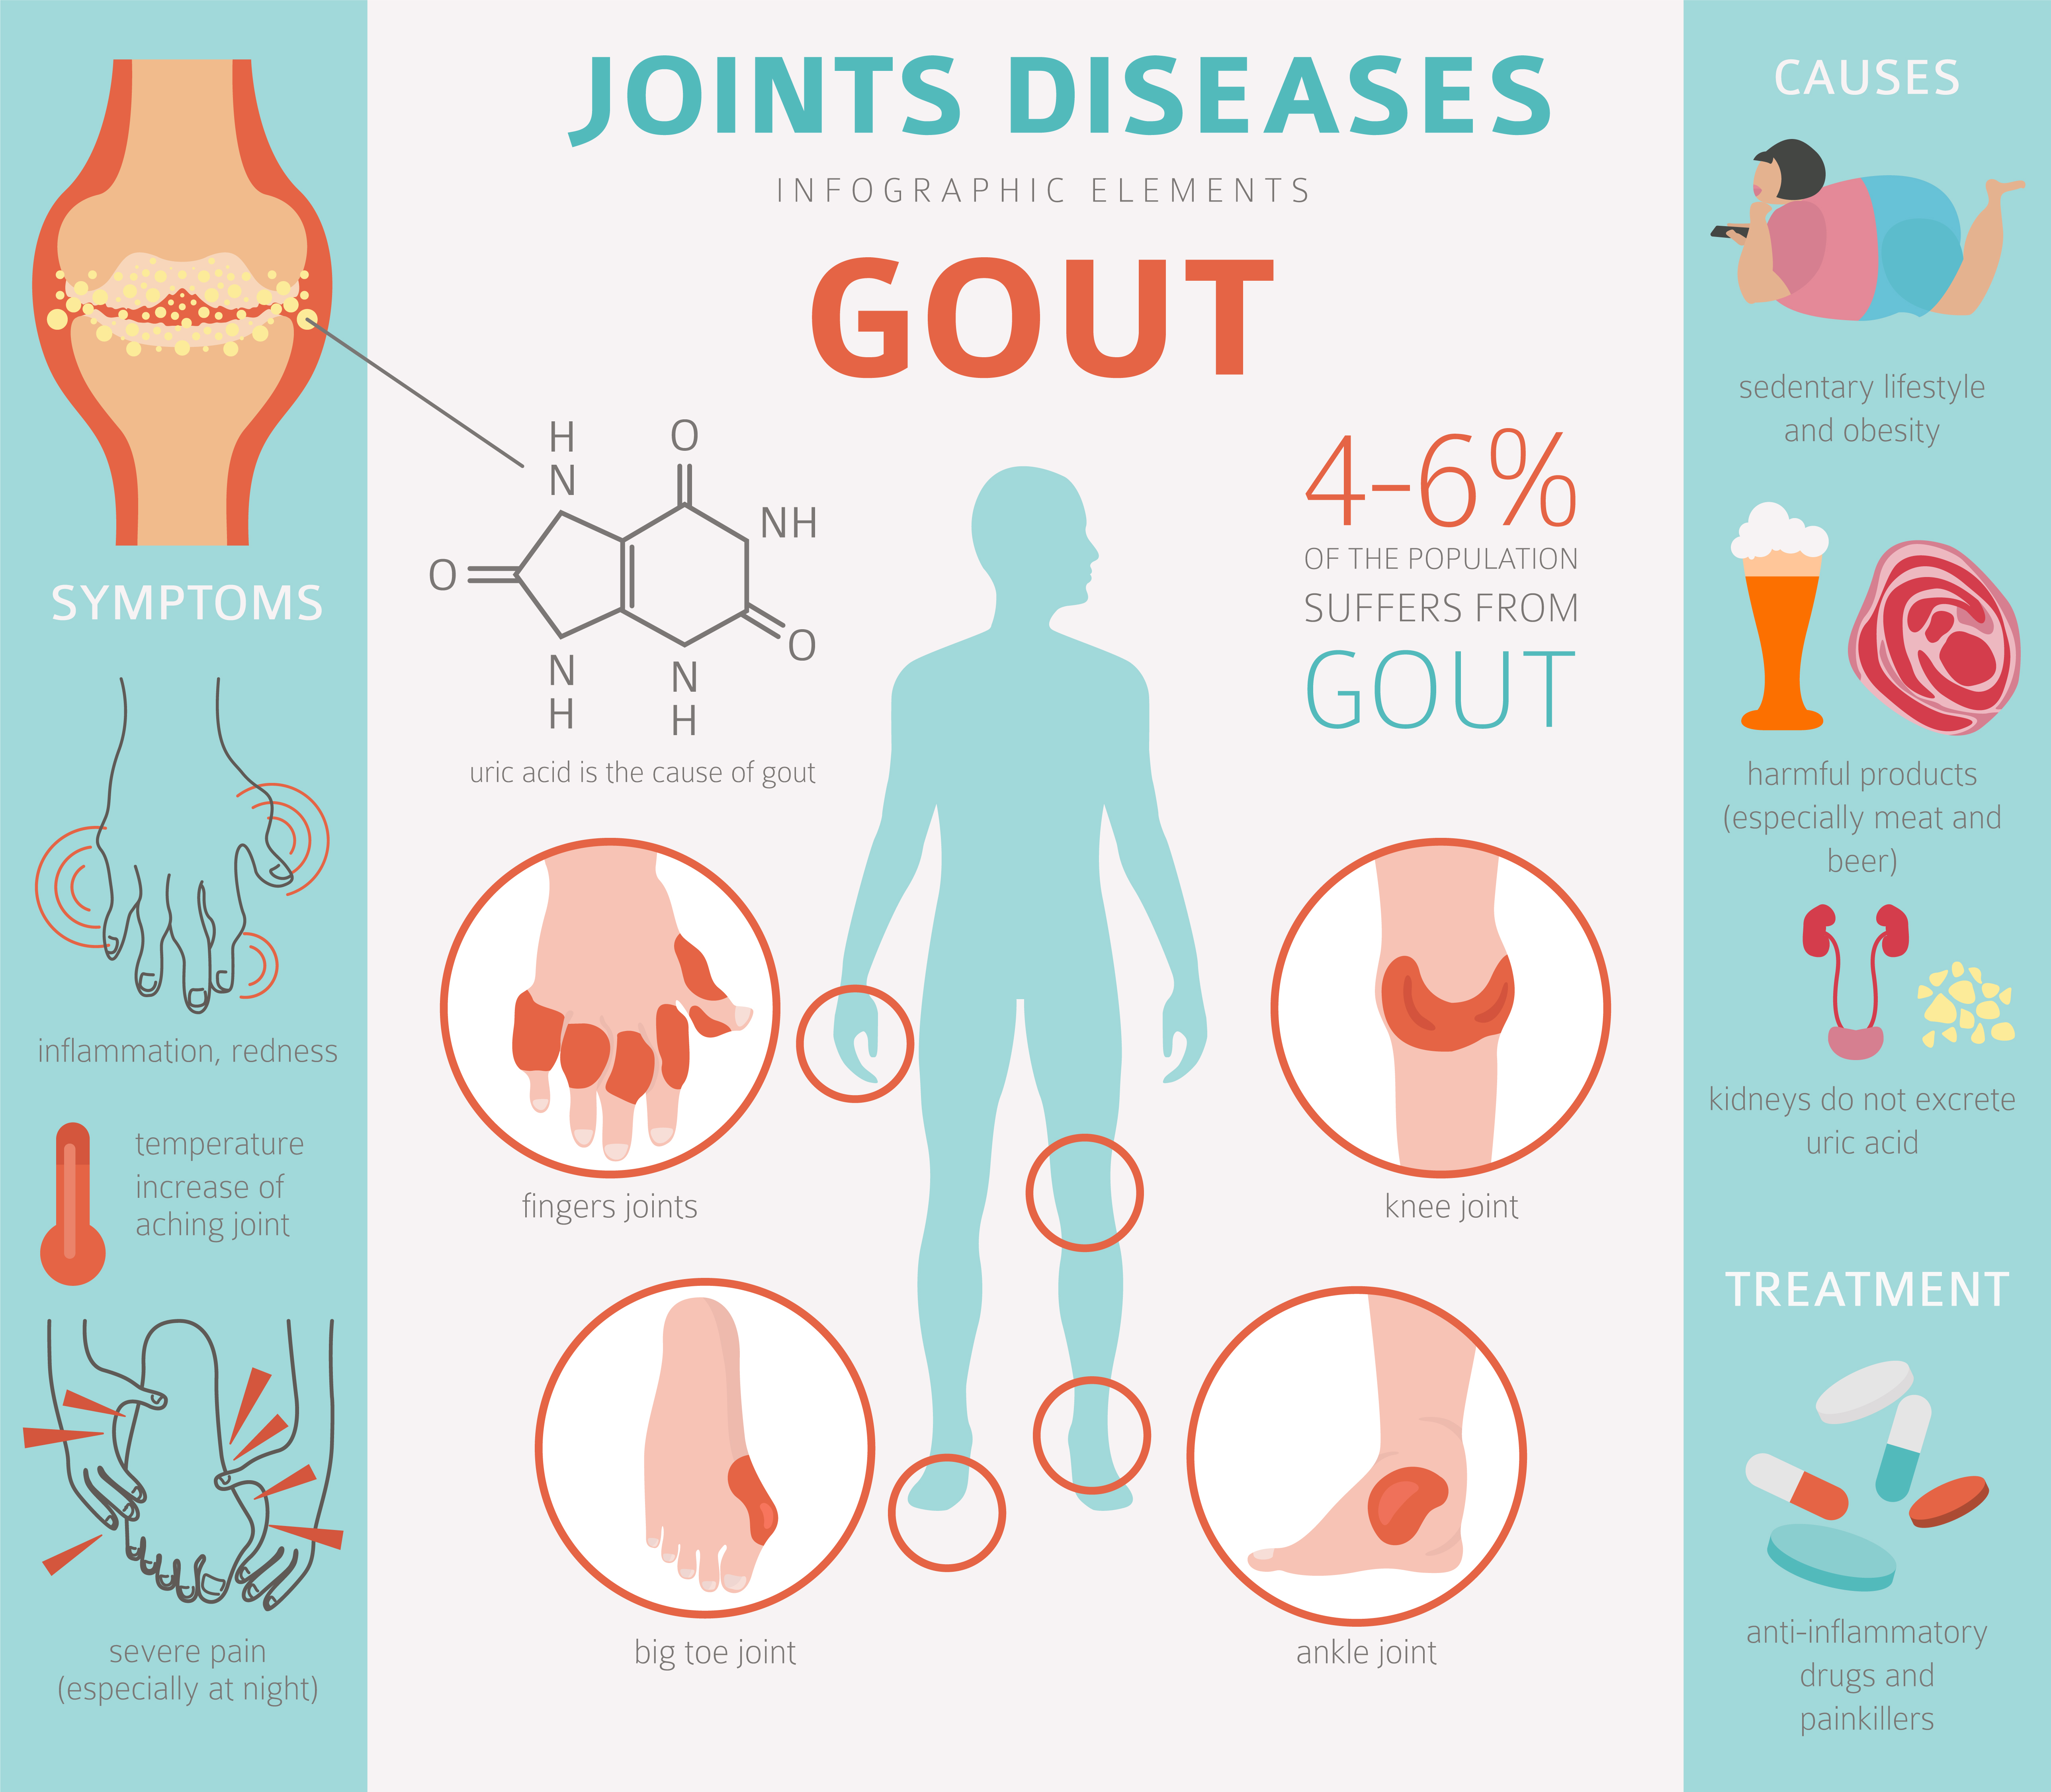 Gout Joint diseases Symptoms & Causes - Treatment @ MDIMC